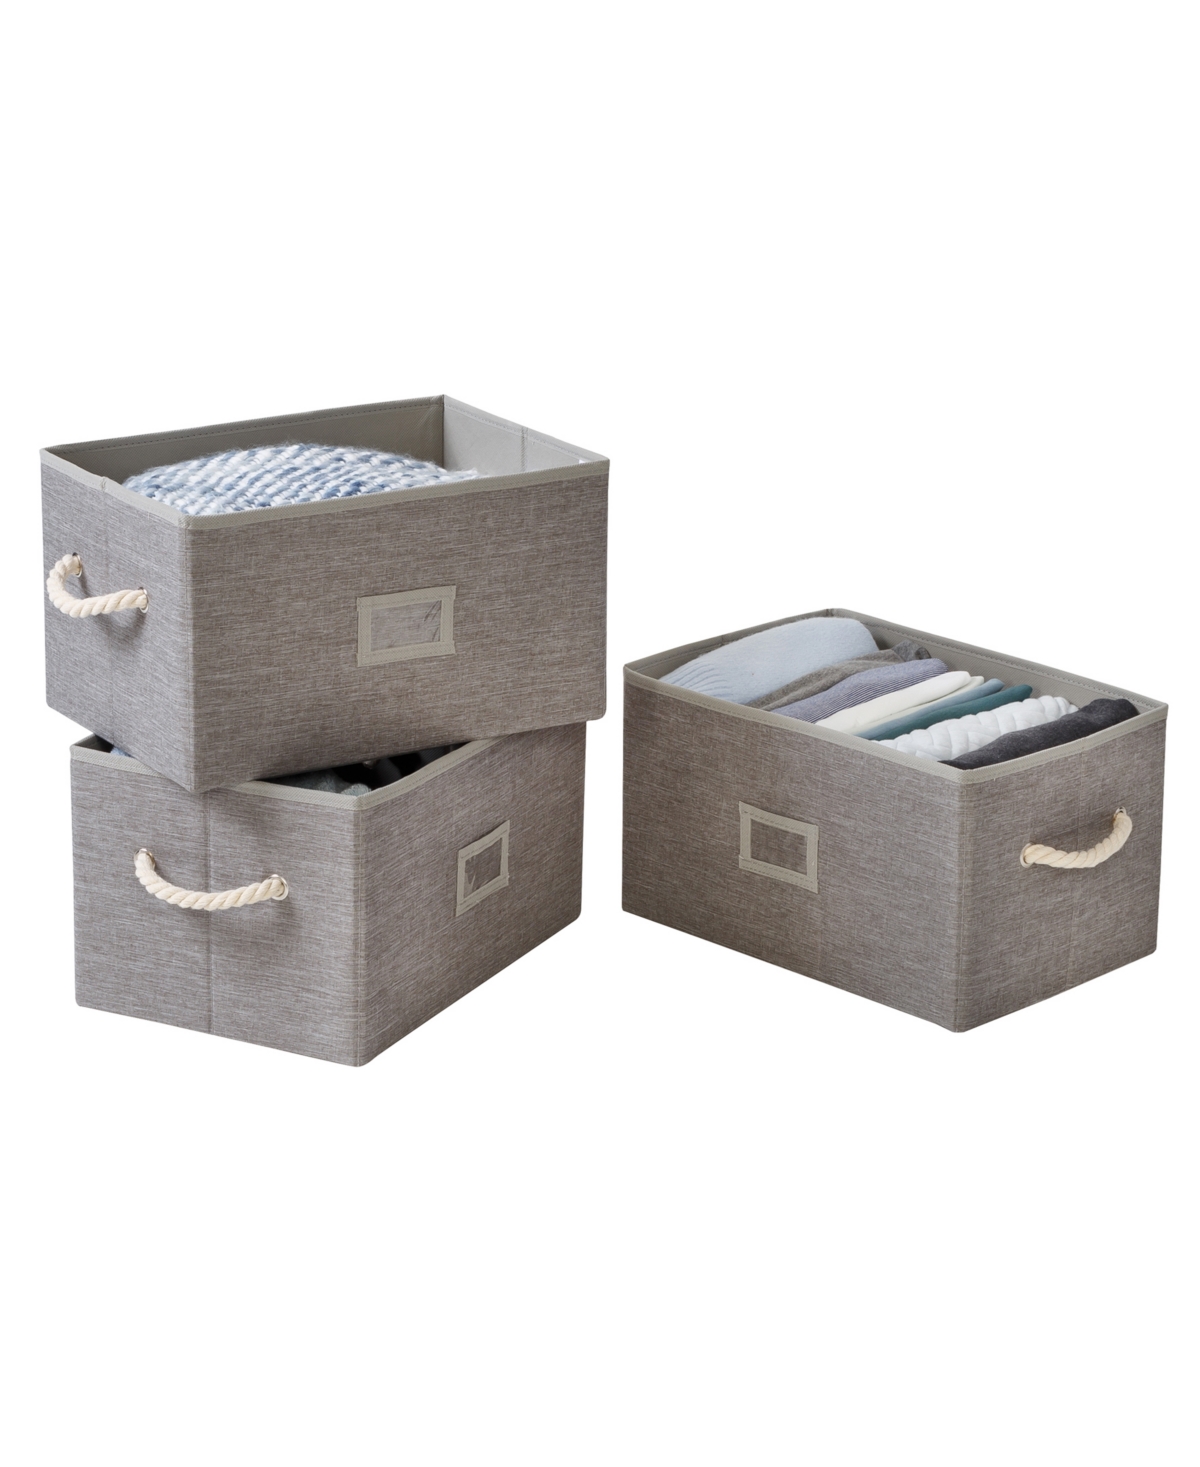 Honey Can Do Set Of 3 Large Fabric Storage Bins With Handles, Heather In Gray